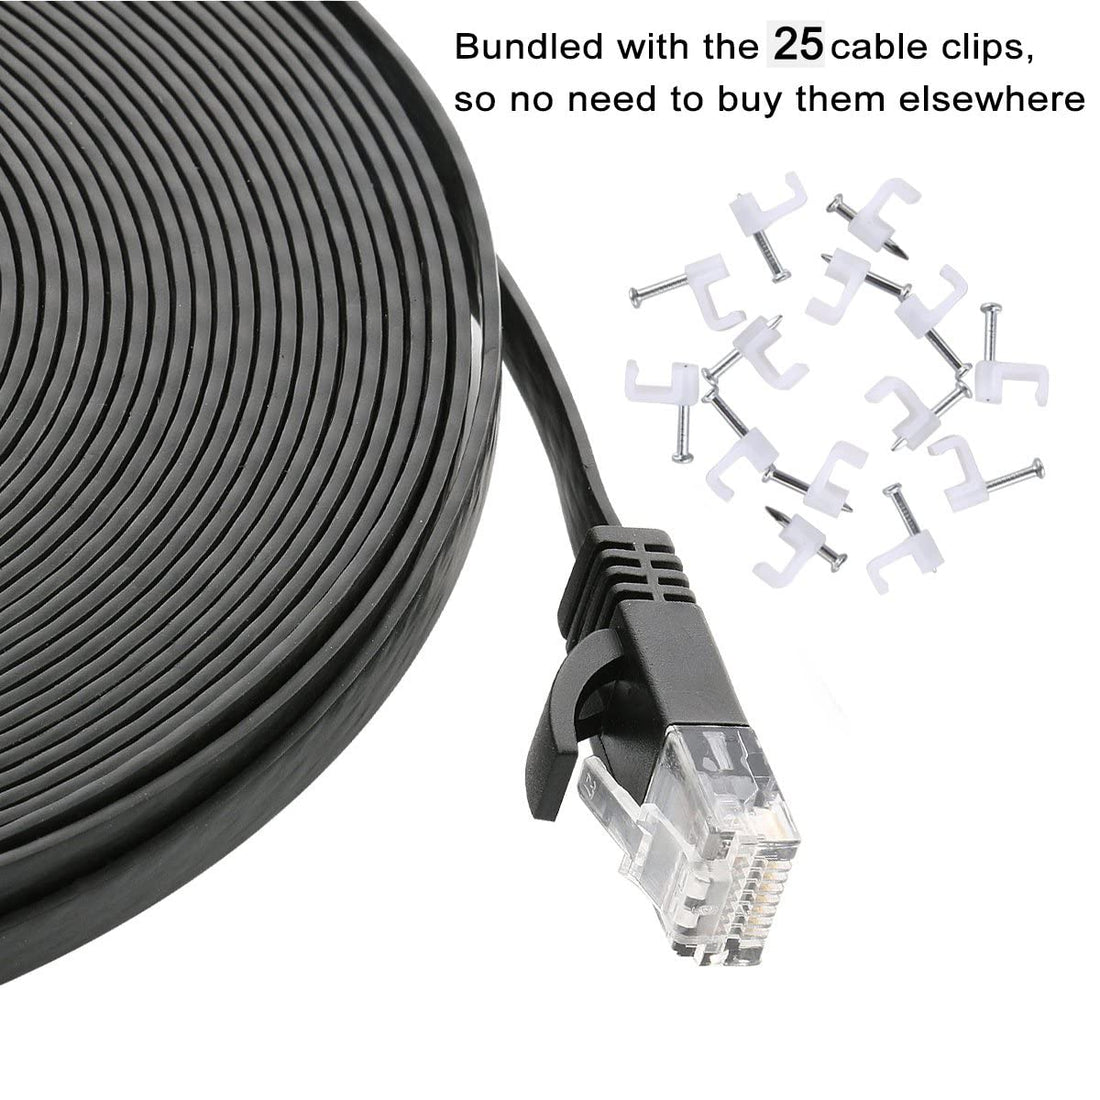 Ethernet Cable Cat6 Flat 75 ft with Cable Clips, jadaol Network Patch Cable with Rj45 Connectors - 75 Feet Black (22 Meters)